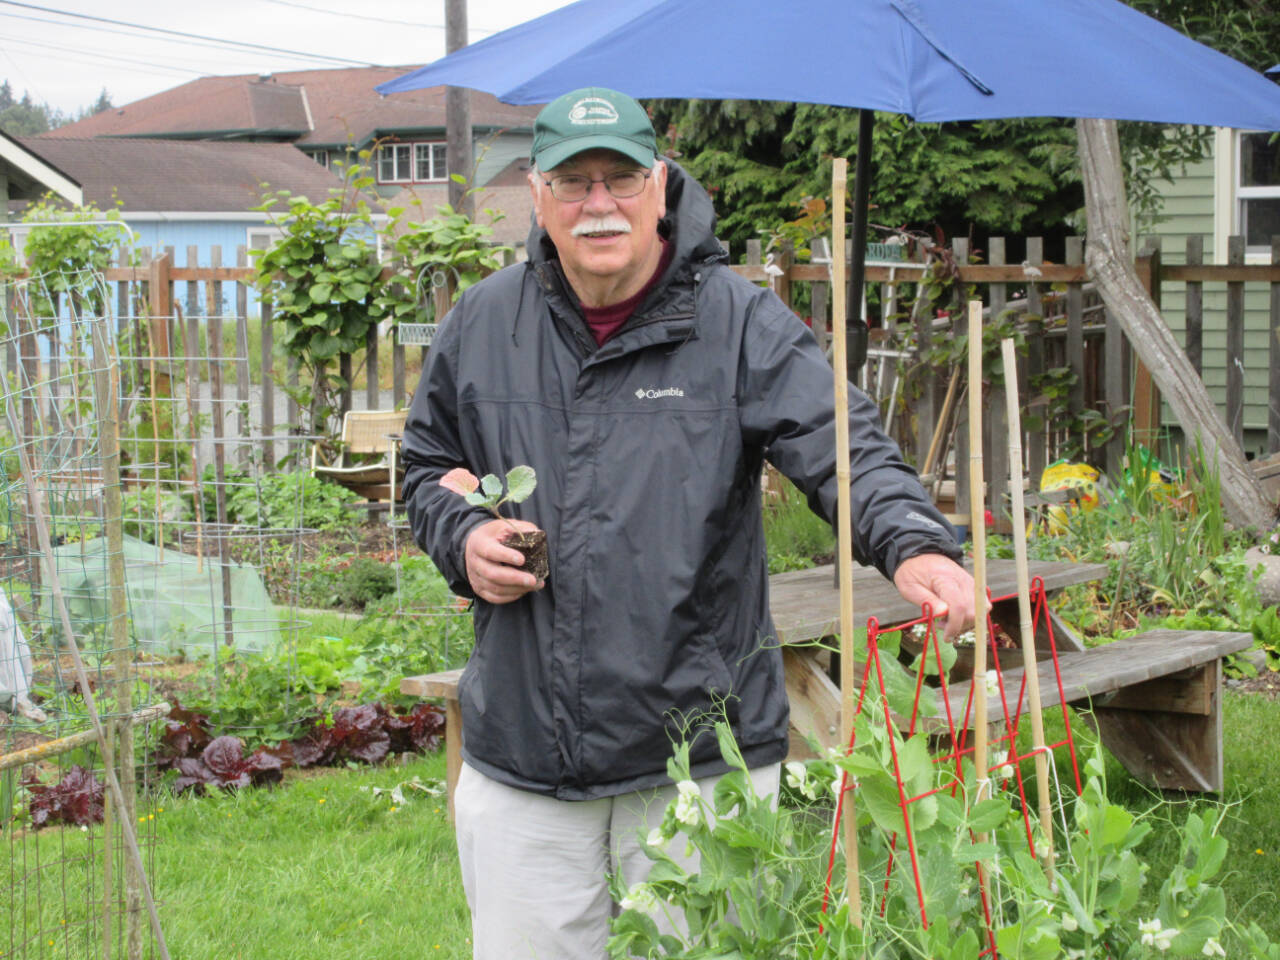 Submitted photo
Clallam County Master Gardener Bob Cain will share tips on growing vegetables in fall and winter from 10:30 a.m.-noon on Saturday, July 16, via Zoom.